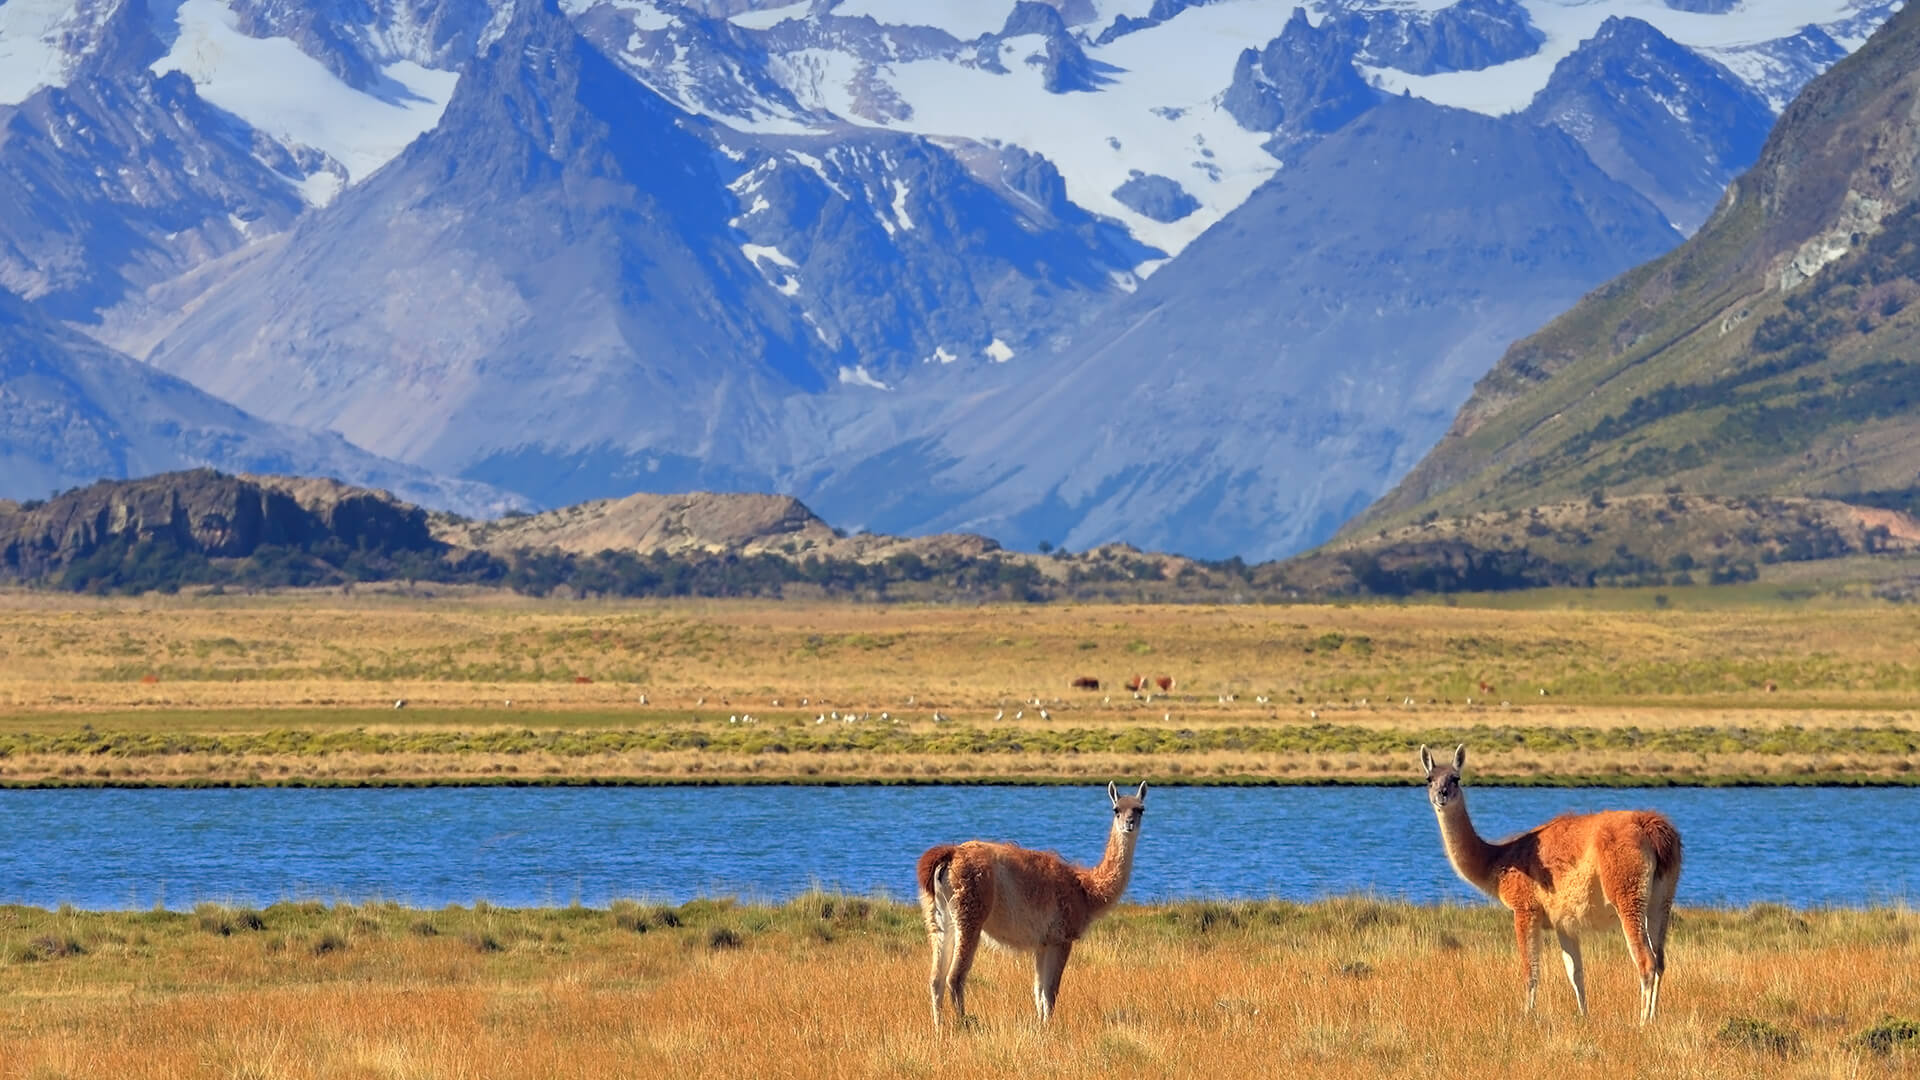 A pair of guanaco grazing in a yellow field in front of a blue lake and snow-capped mountains of Patagonia